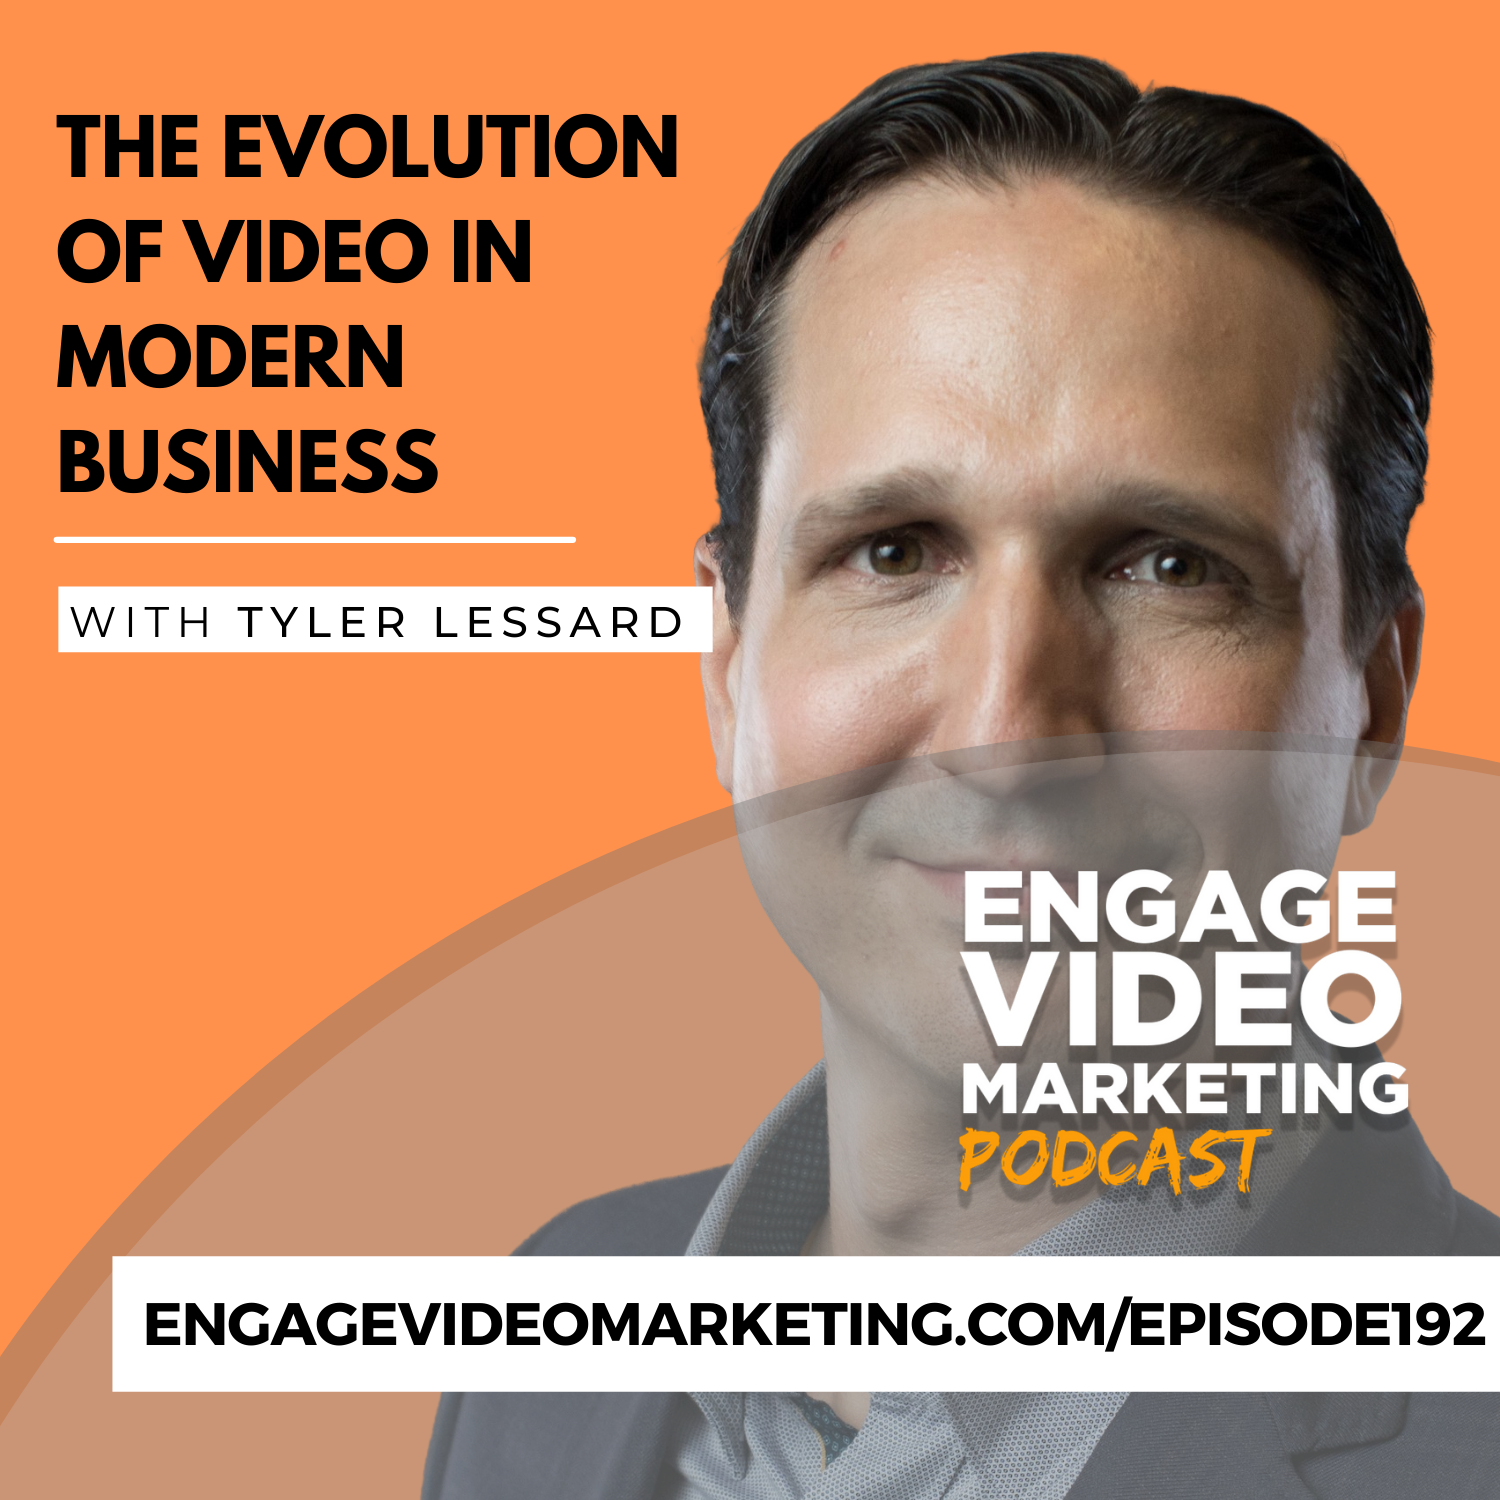 The Evolution of Video in Modern Business with Tyler Lessard